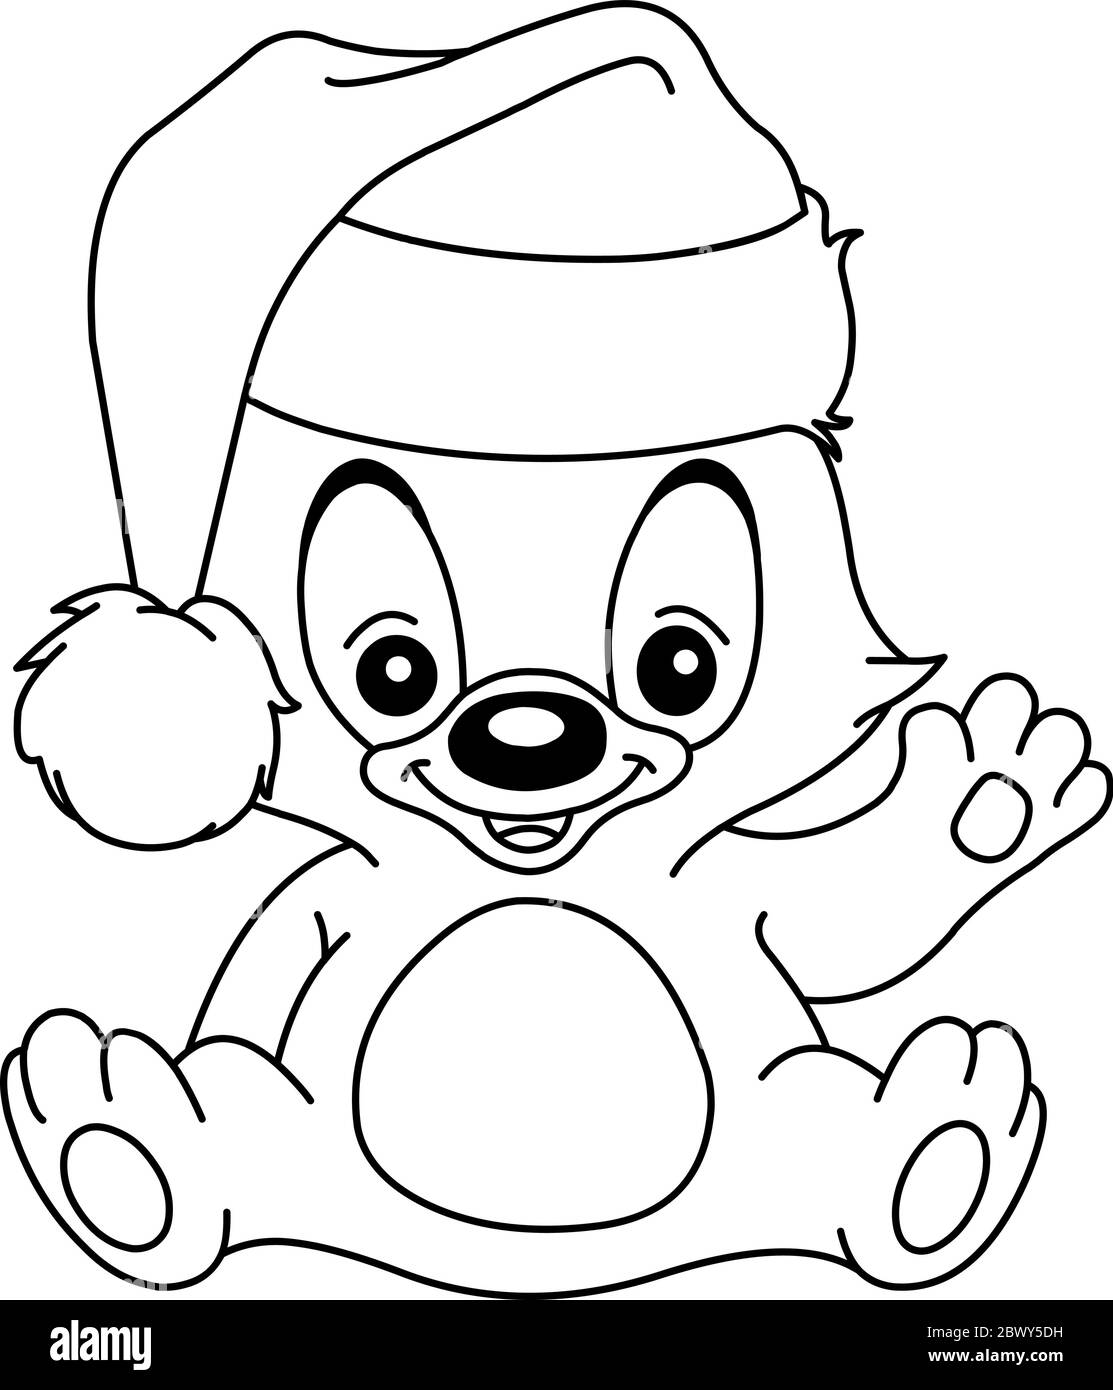 Outlined Christmas teddy bear waving and wearing a Santa hat. Vector line art illustration coloring page. Stock Vector